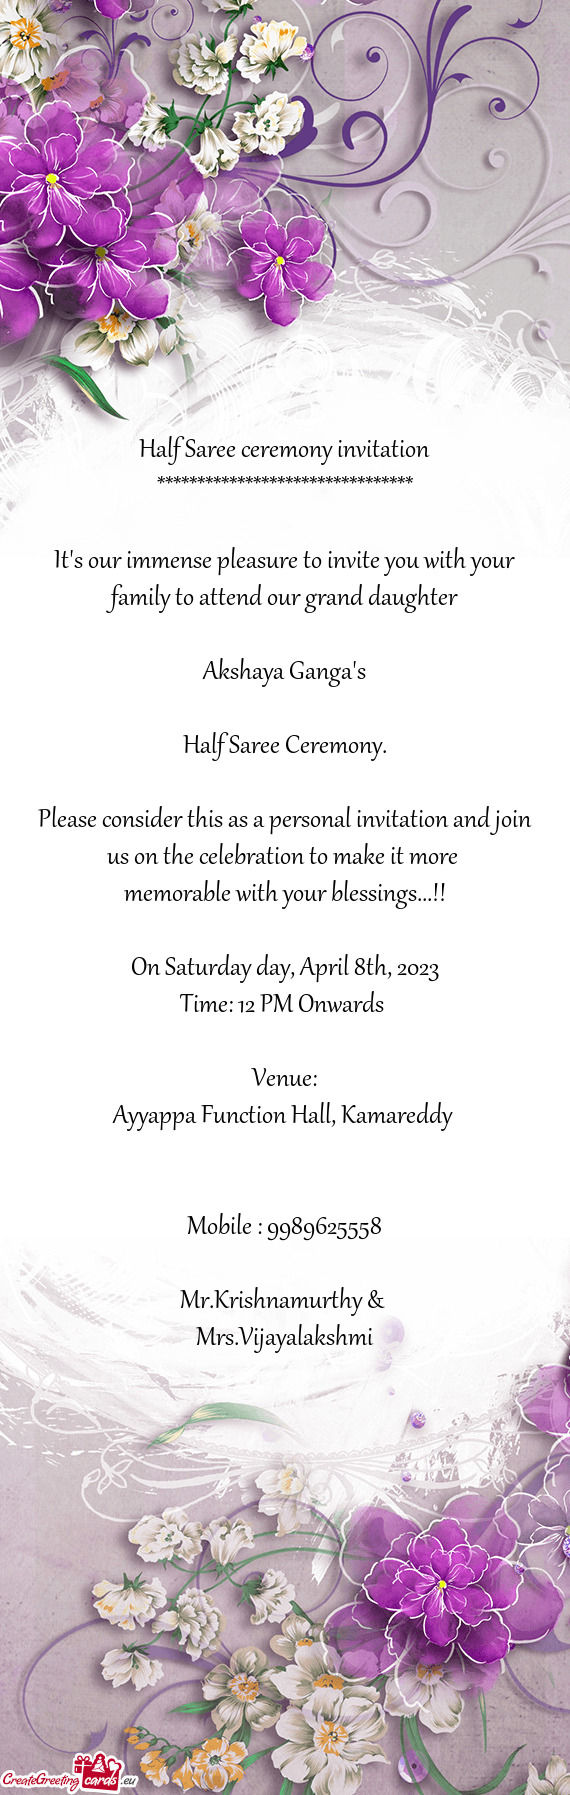 Please consider this as a personal invitation and join us on the celebration to make it more